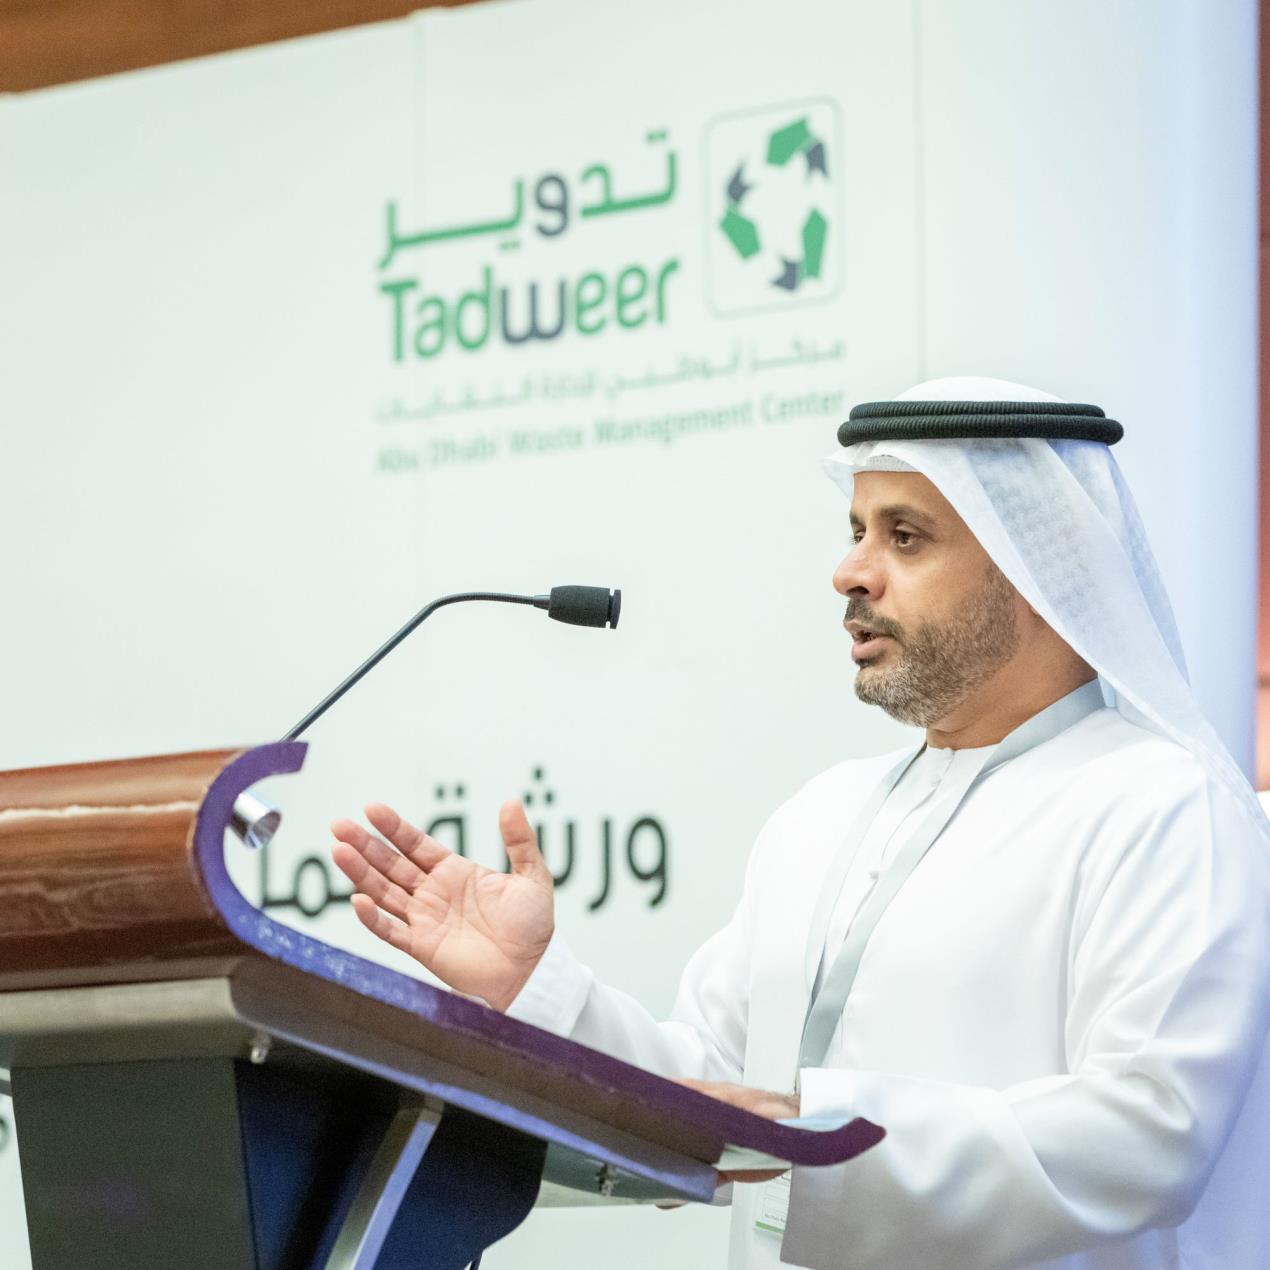 Tadweer Hosts Workshop To Achieve Zero Waste, Promote Sustainable Practices In Food Waste Management